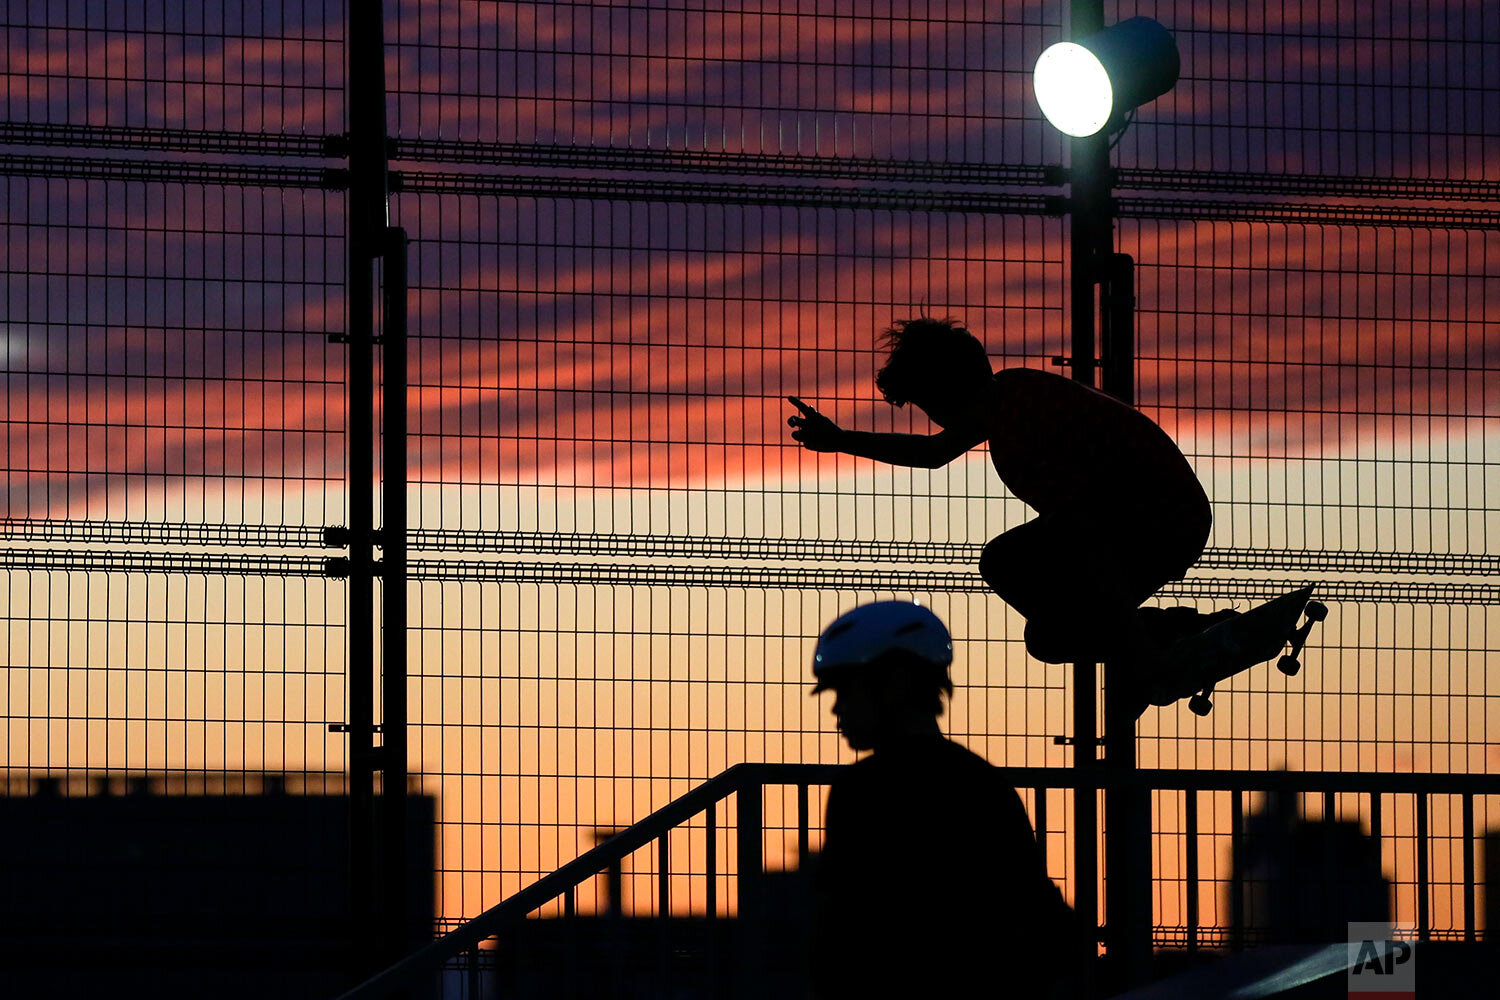  Skateboarders perform tricks silhouetted against the sunset colored sky on Sunday, Oct. 18, 2020, in Tokyo. (AP Photo/Kiichiro Sato) 